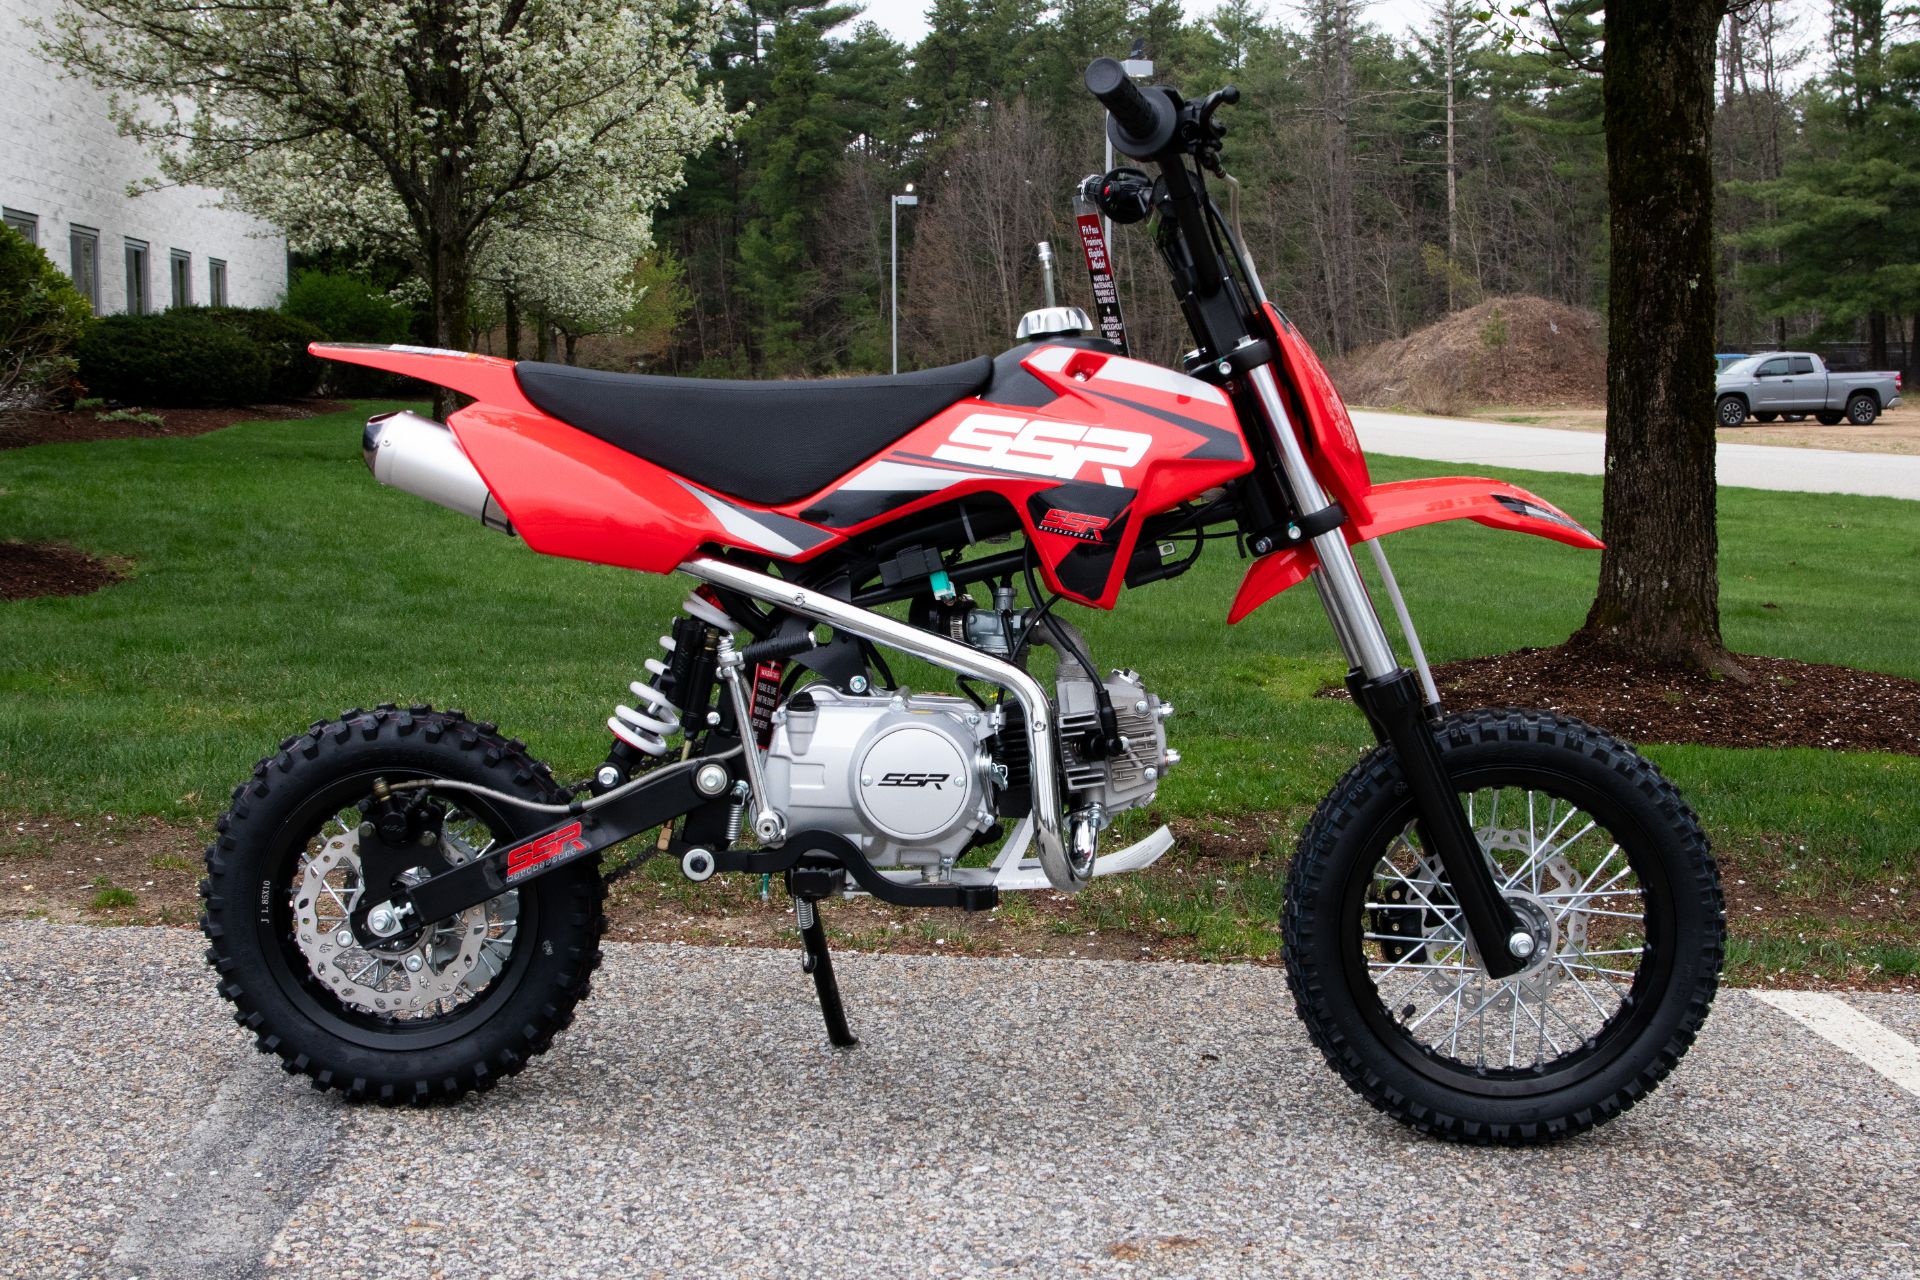 2022 SSR Motorsports SR110DX in Concord, New Hampshire - Photo 1